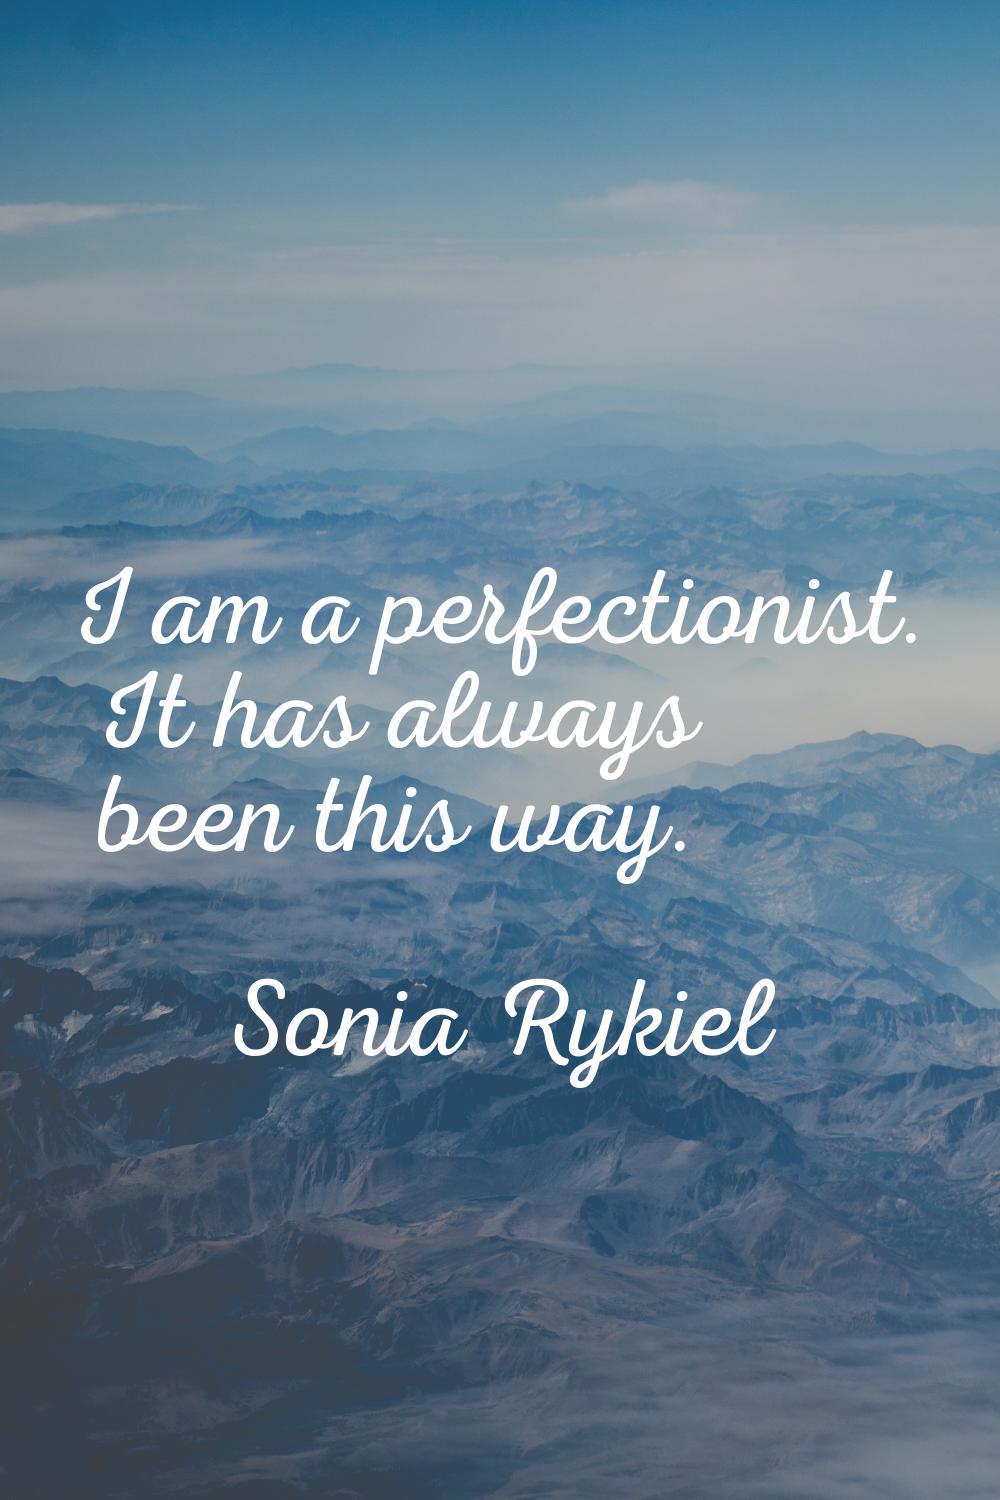 I am a perfectionist. It has always been this way.